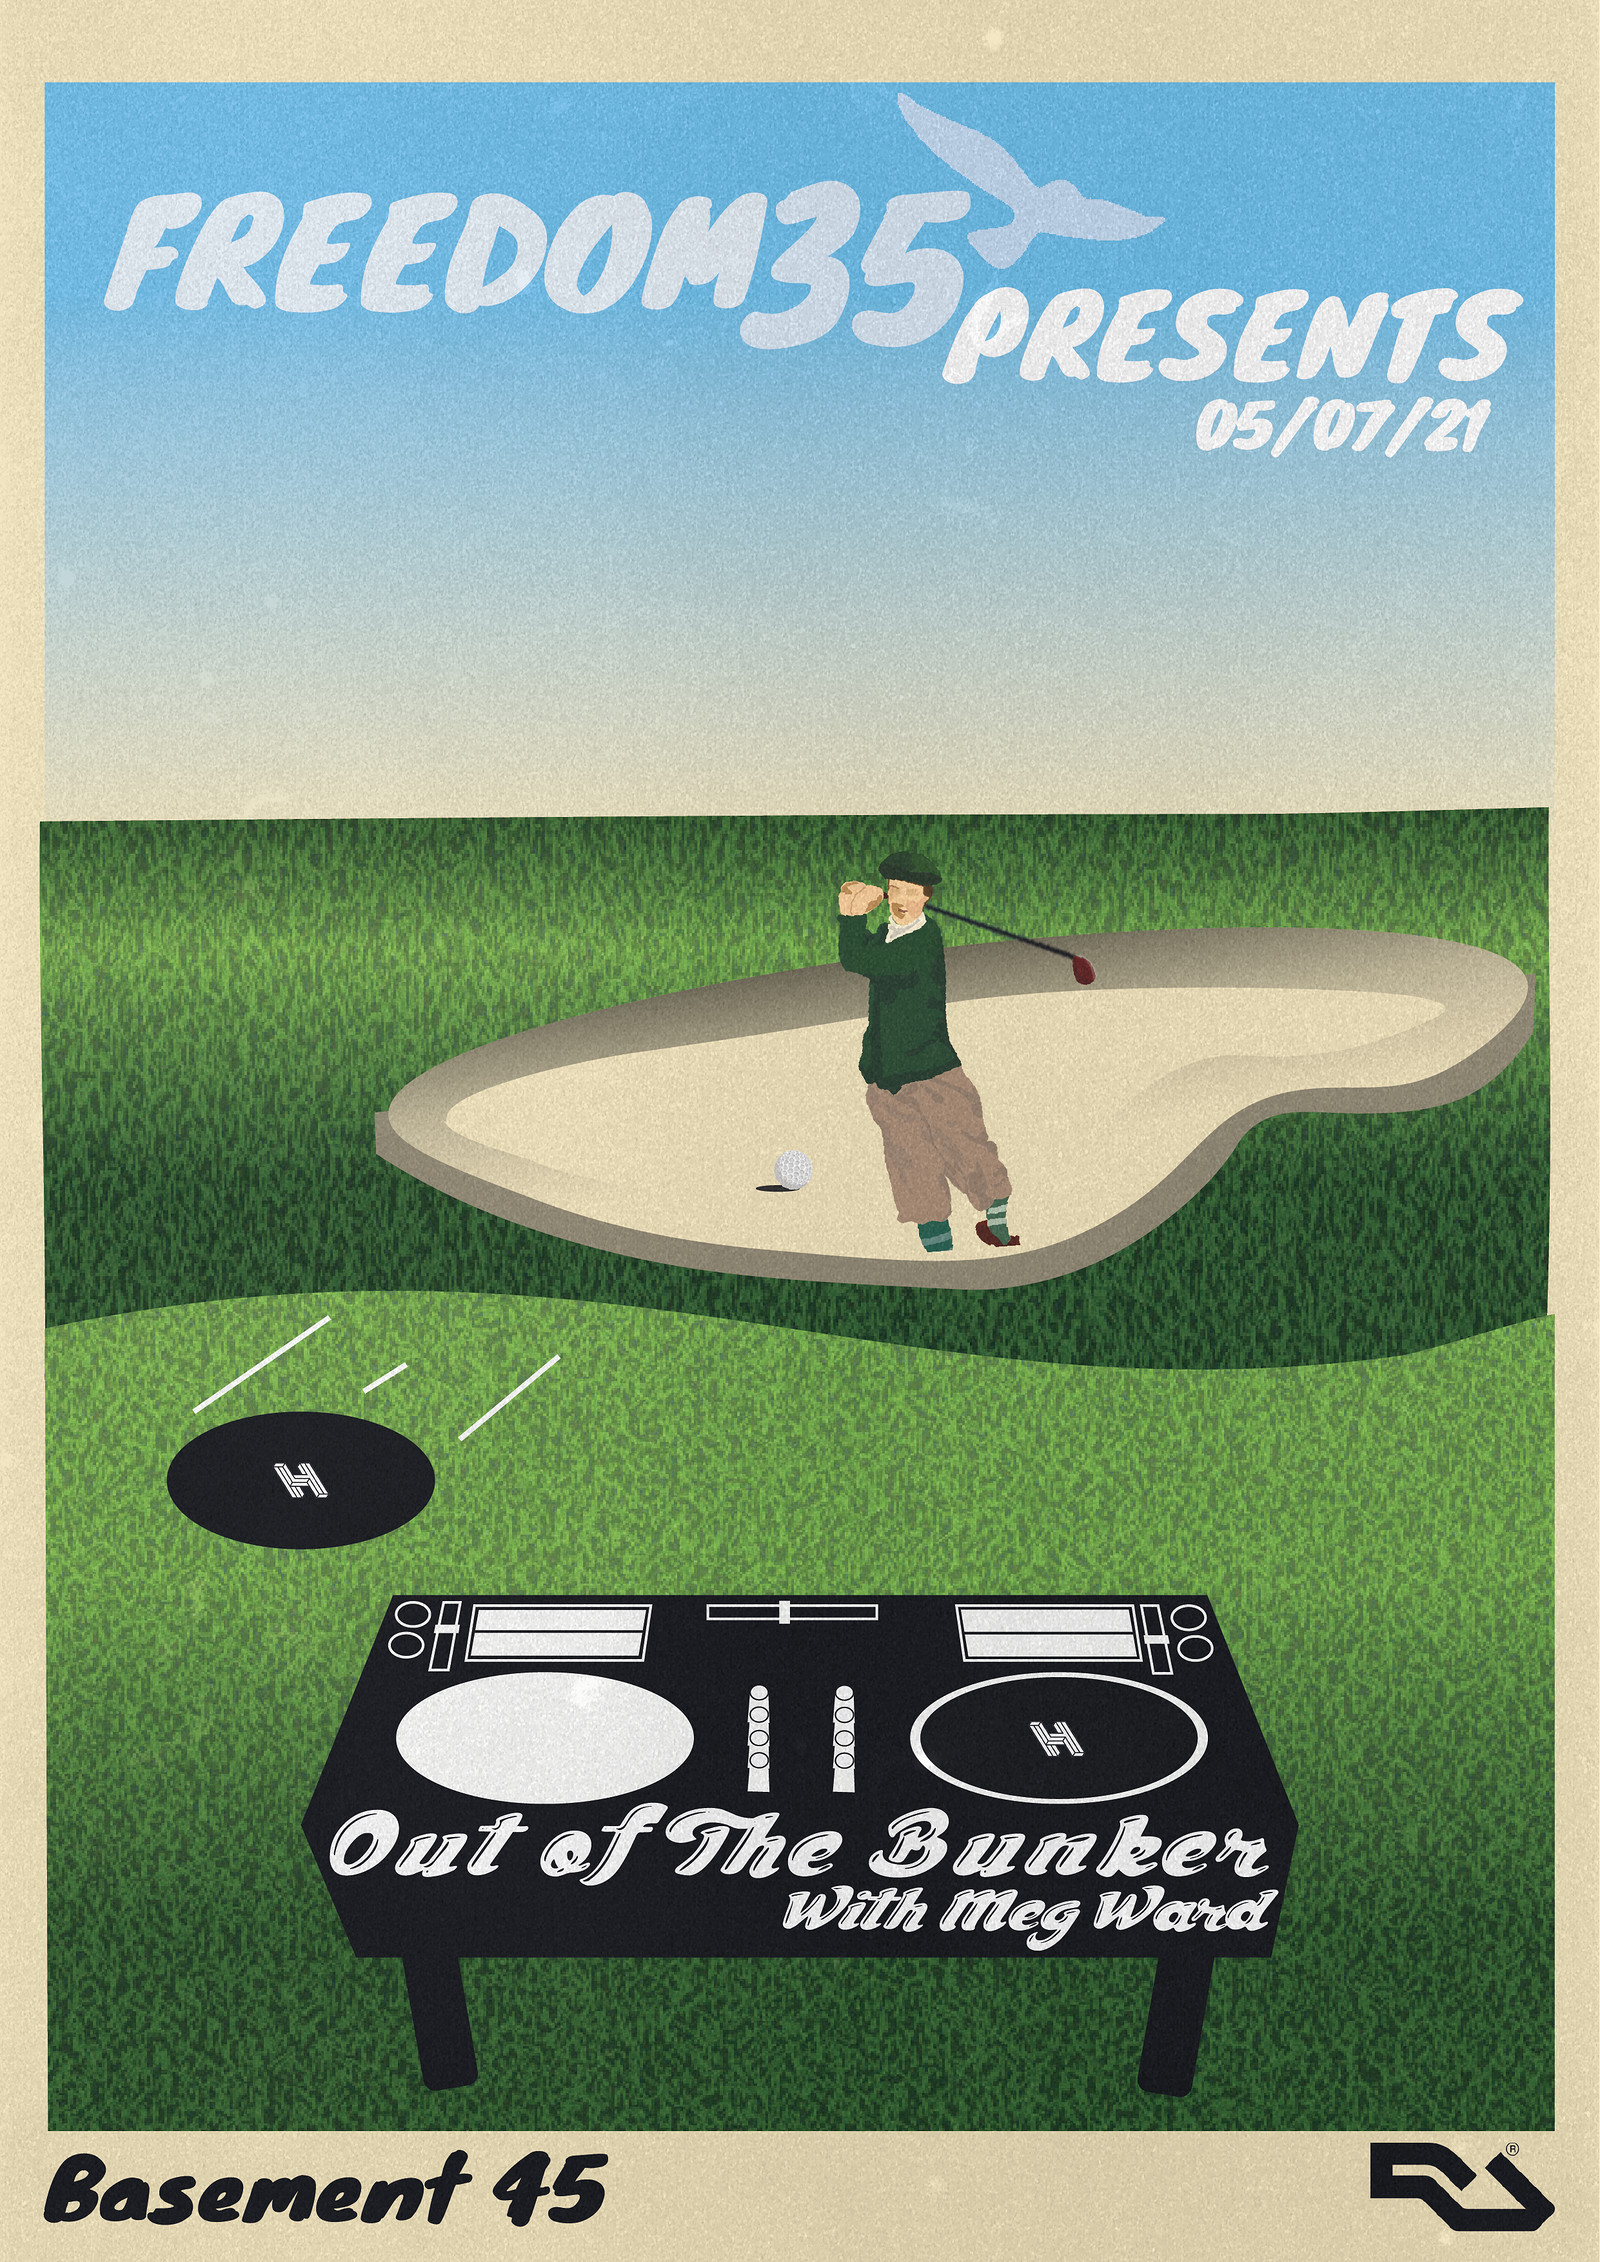 Freedom 35: Out of the Bunker at Basement 45